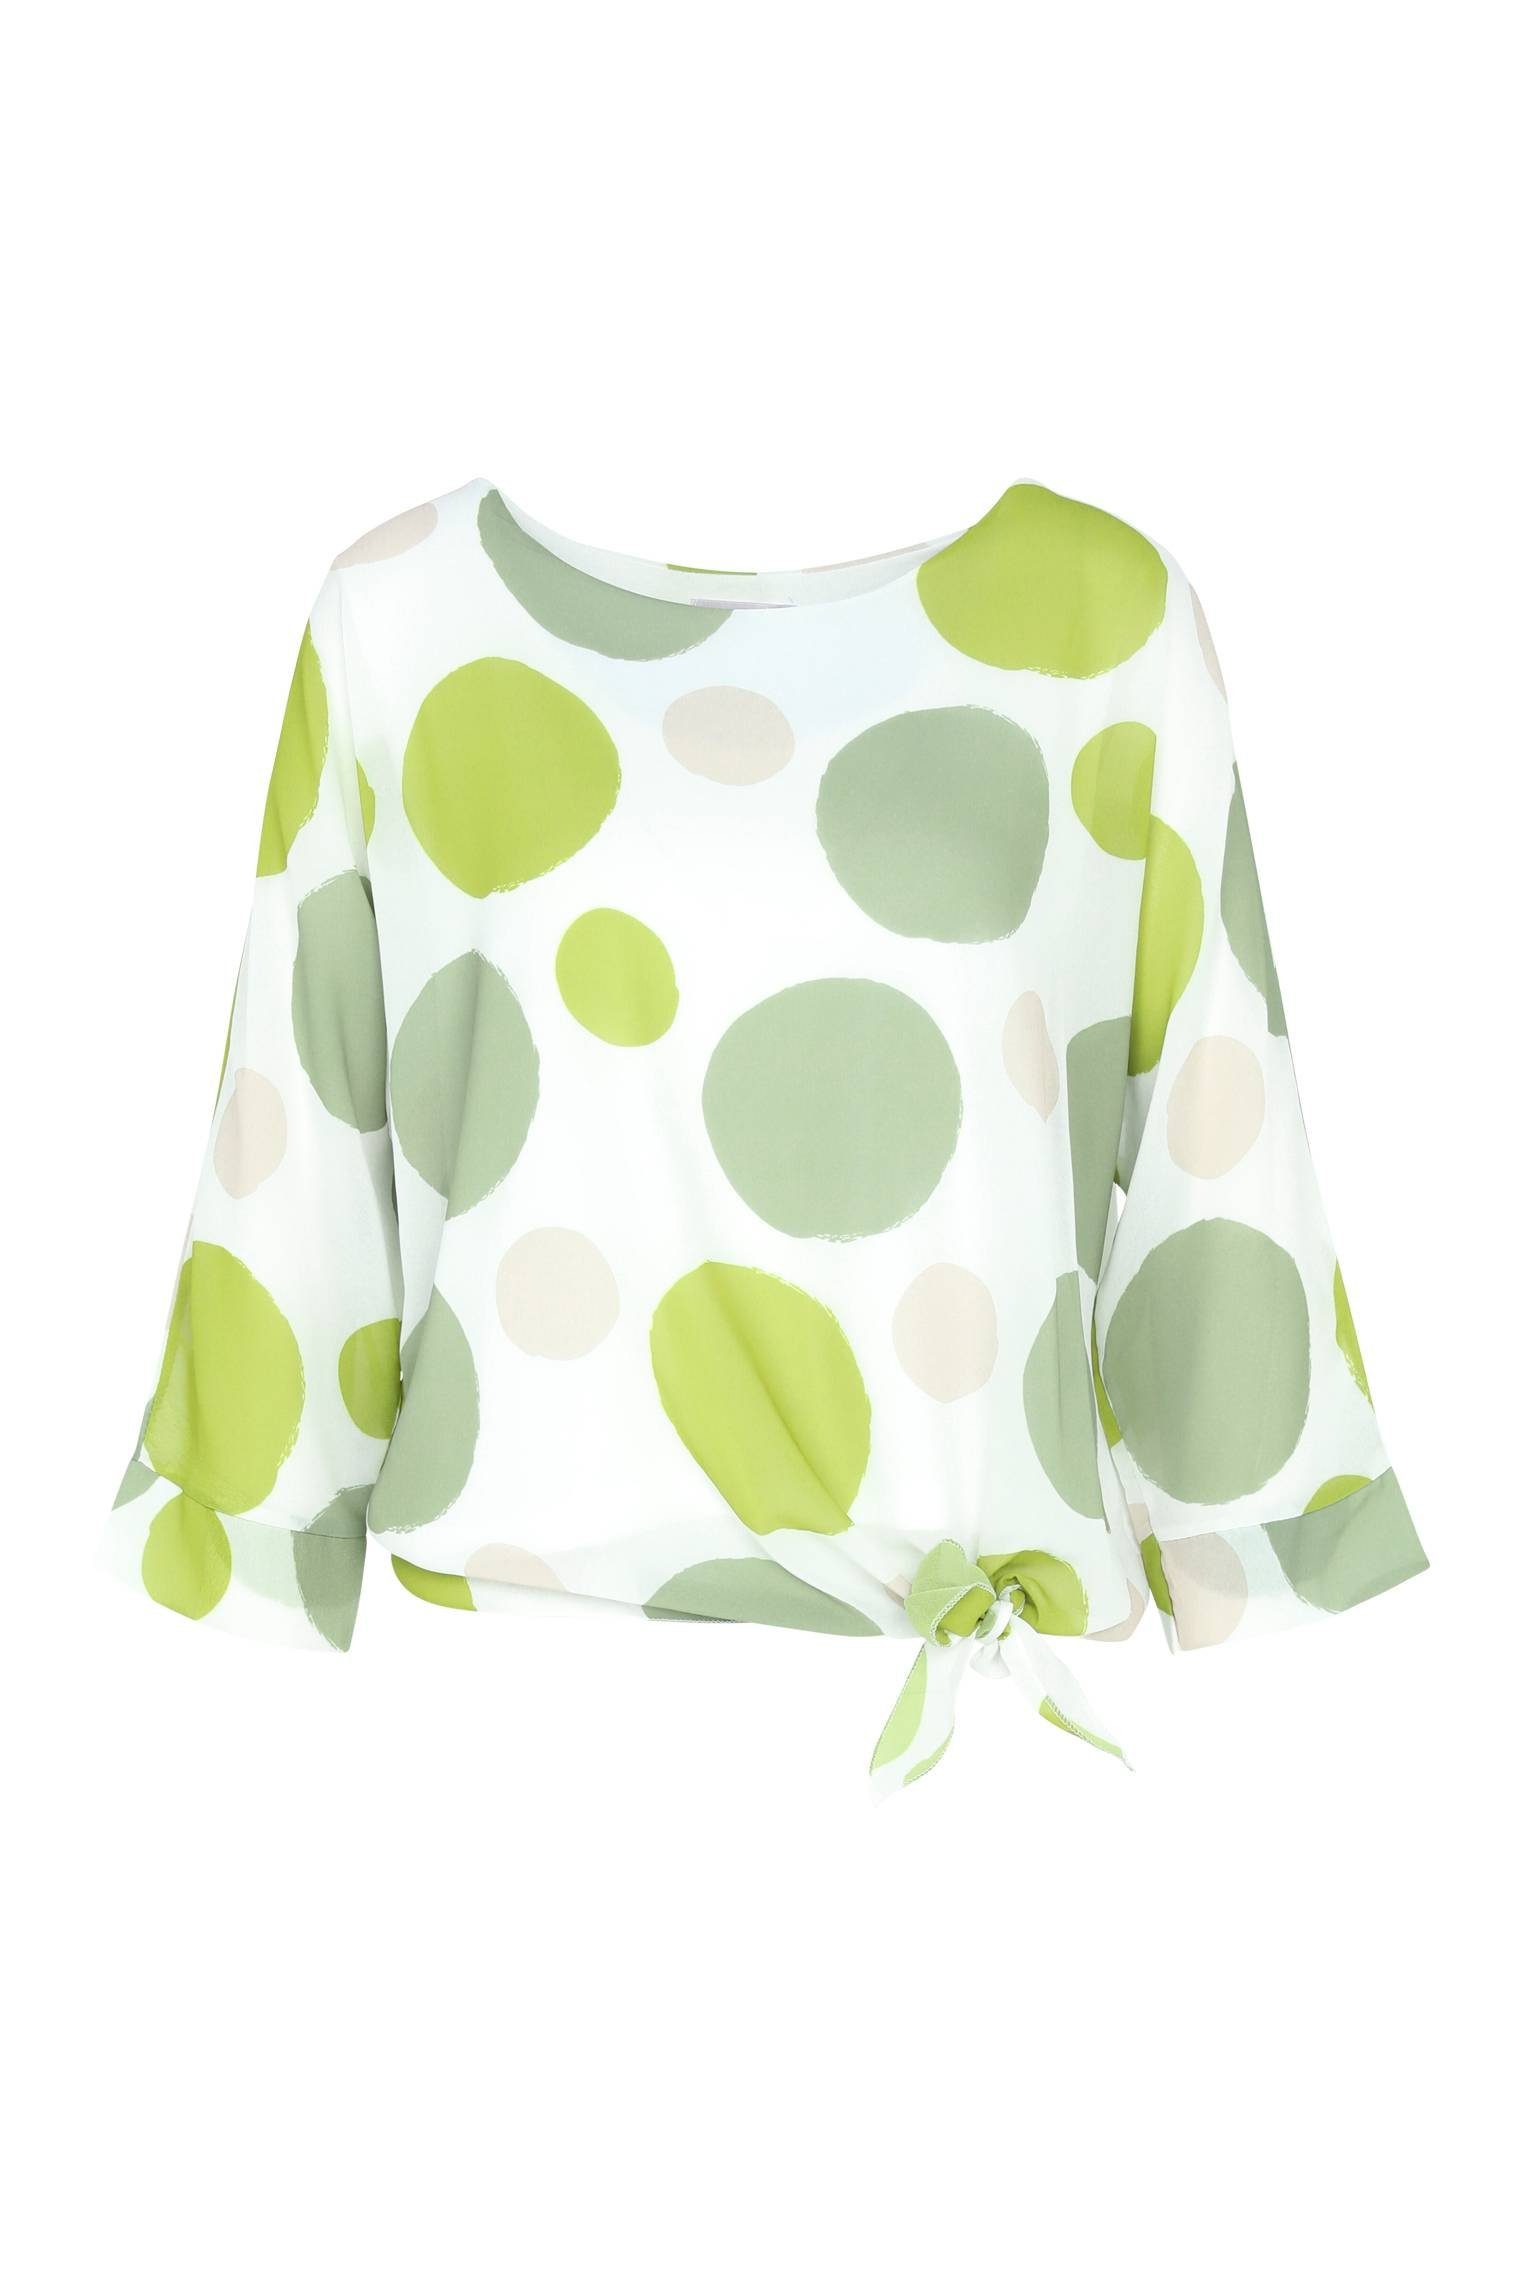 Cassis Shirtbluse Bluse In Ballonform Mit Knopf Und Polka-Dot-Muster (1-tlg)